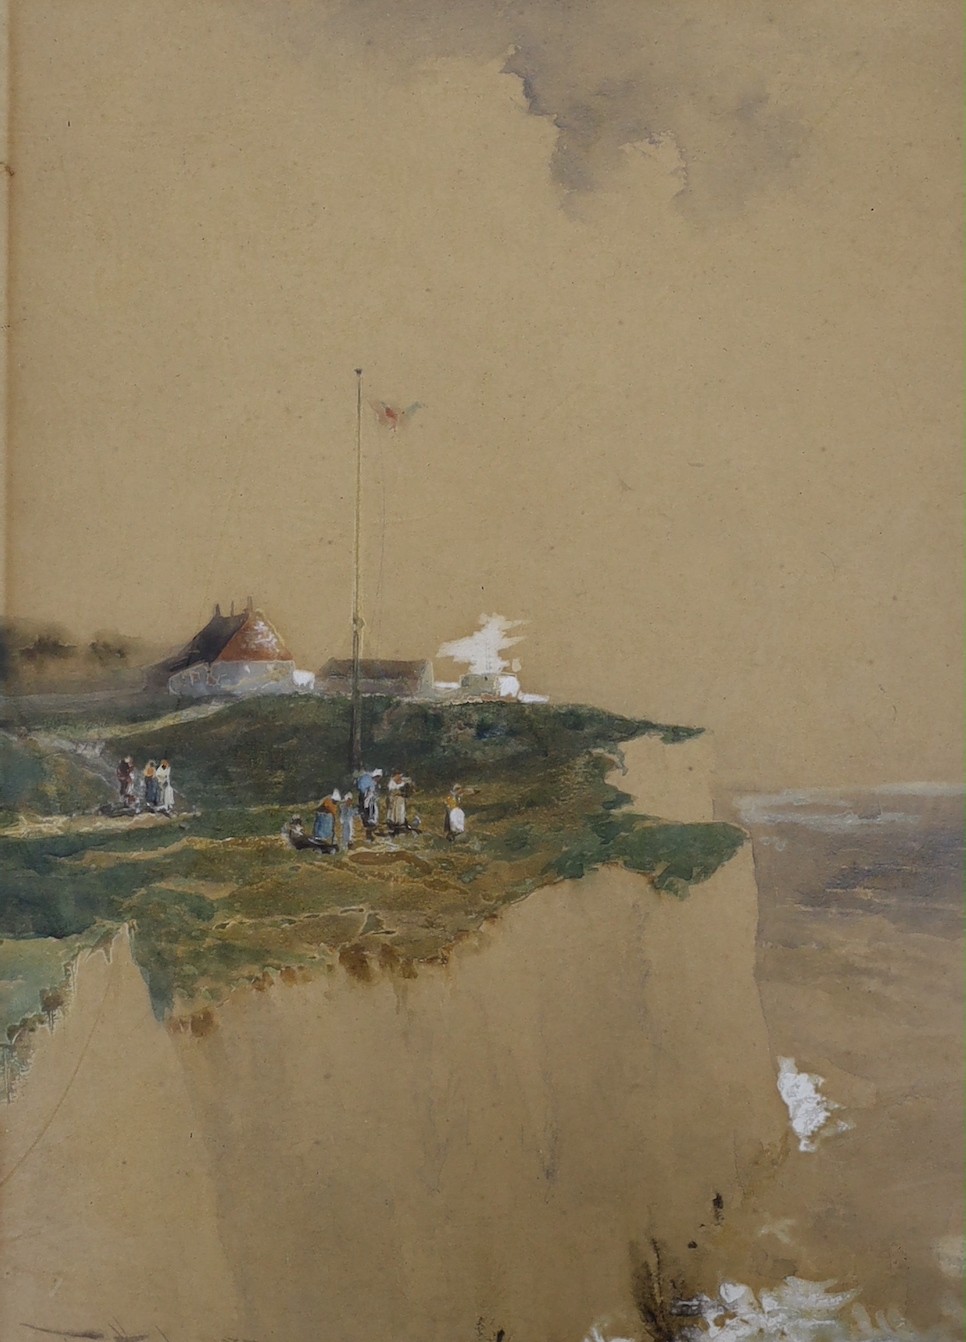 Thomas Bush Hardy (1842-1897), watercolour, 'The signal station', signed and dated 1887, 34 x 24cm